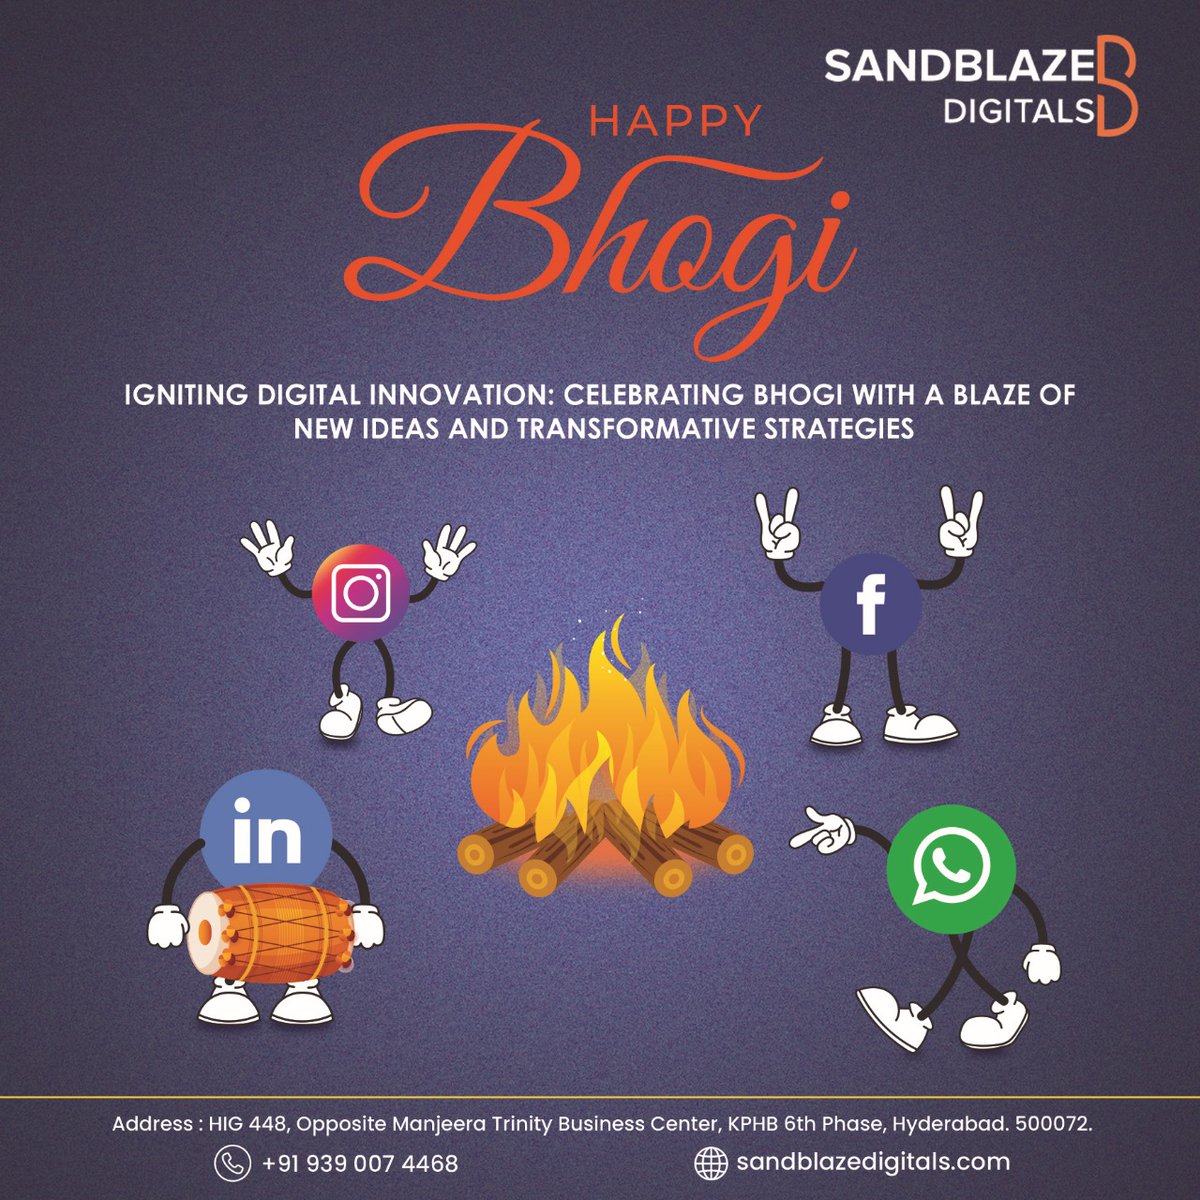 Set your digital presence on fire this Bhogi with Sandblaze Digitals! 🔥 Ignite innovation and burn away the old to make way for transformative strategies. Wishing you a Bhogi that's as bright and brilliant as your ideas! 🌟

#Bhogi #SandblazeDigitals #DigitalMarketing